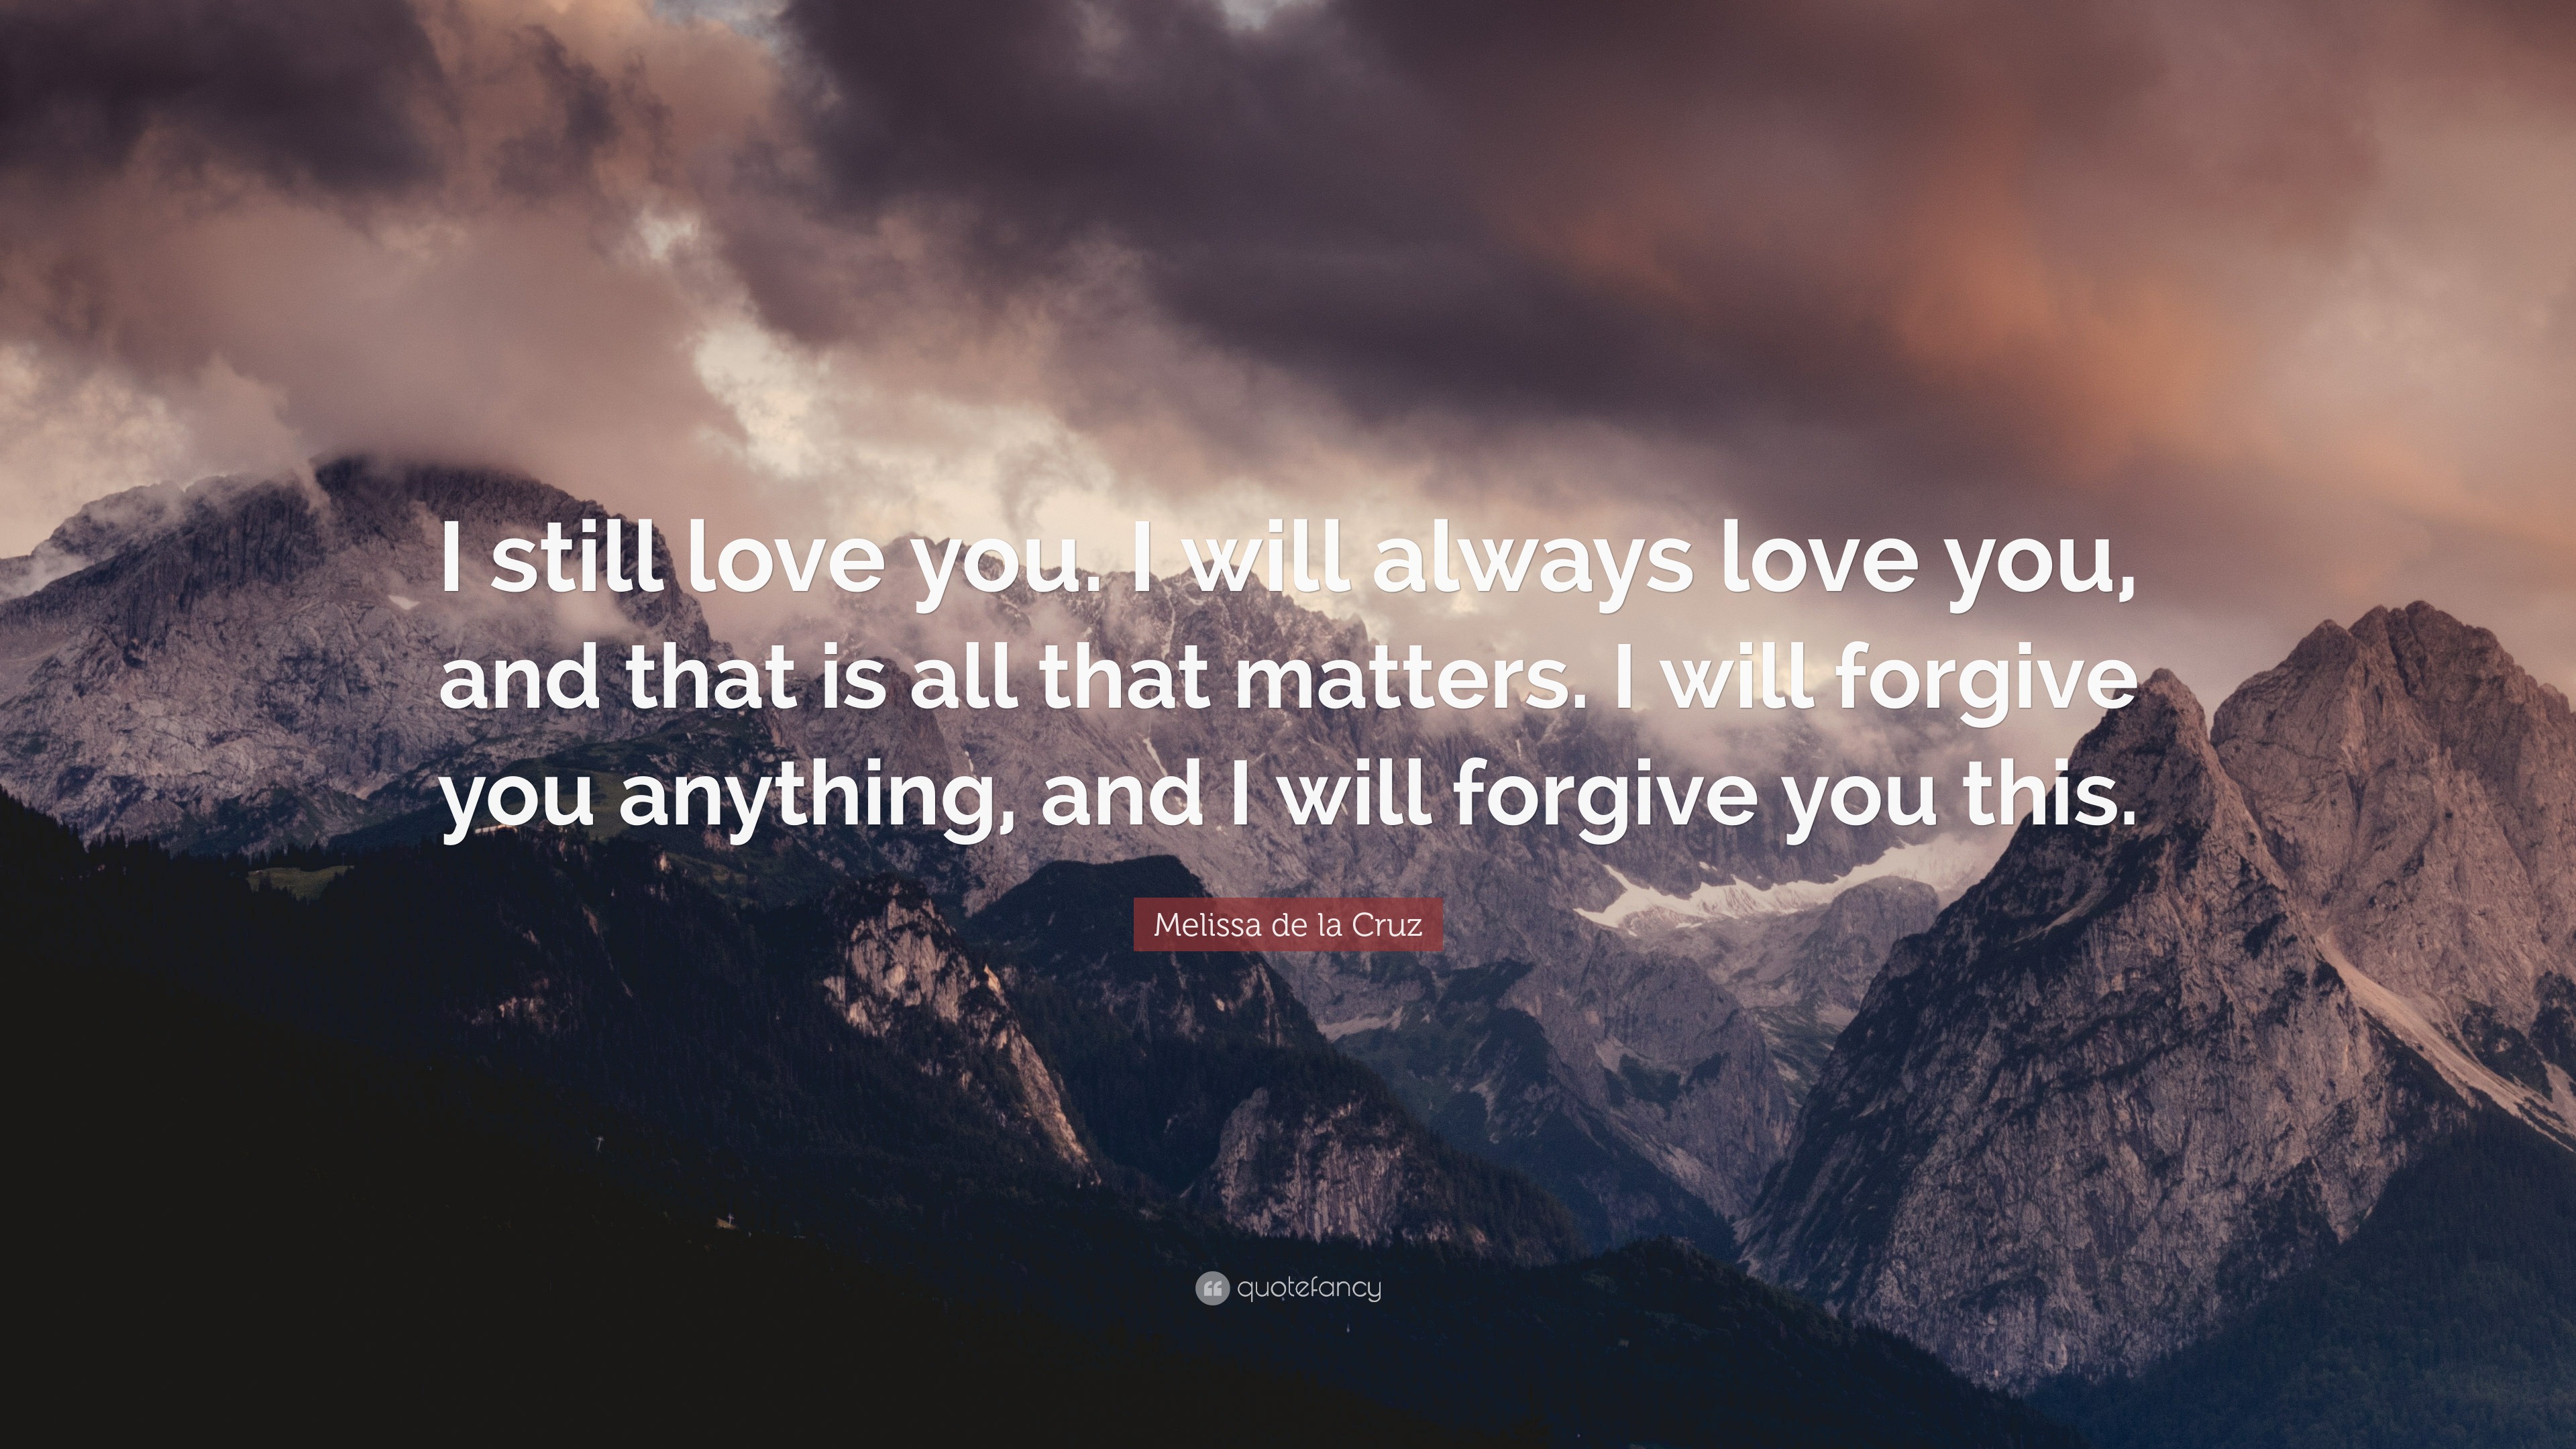 Melissa De La Cruz Quote I Still Love You I Will Always Love You And That Is All That Matters I Will Forgive You Anything And I Will Forgive